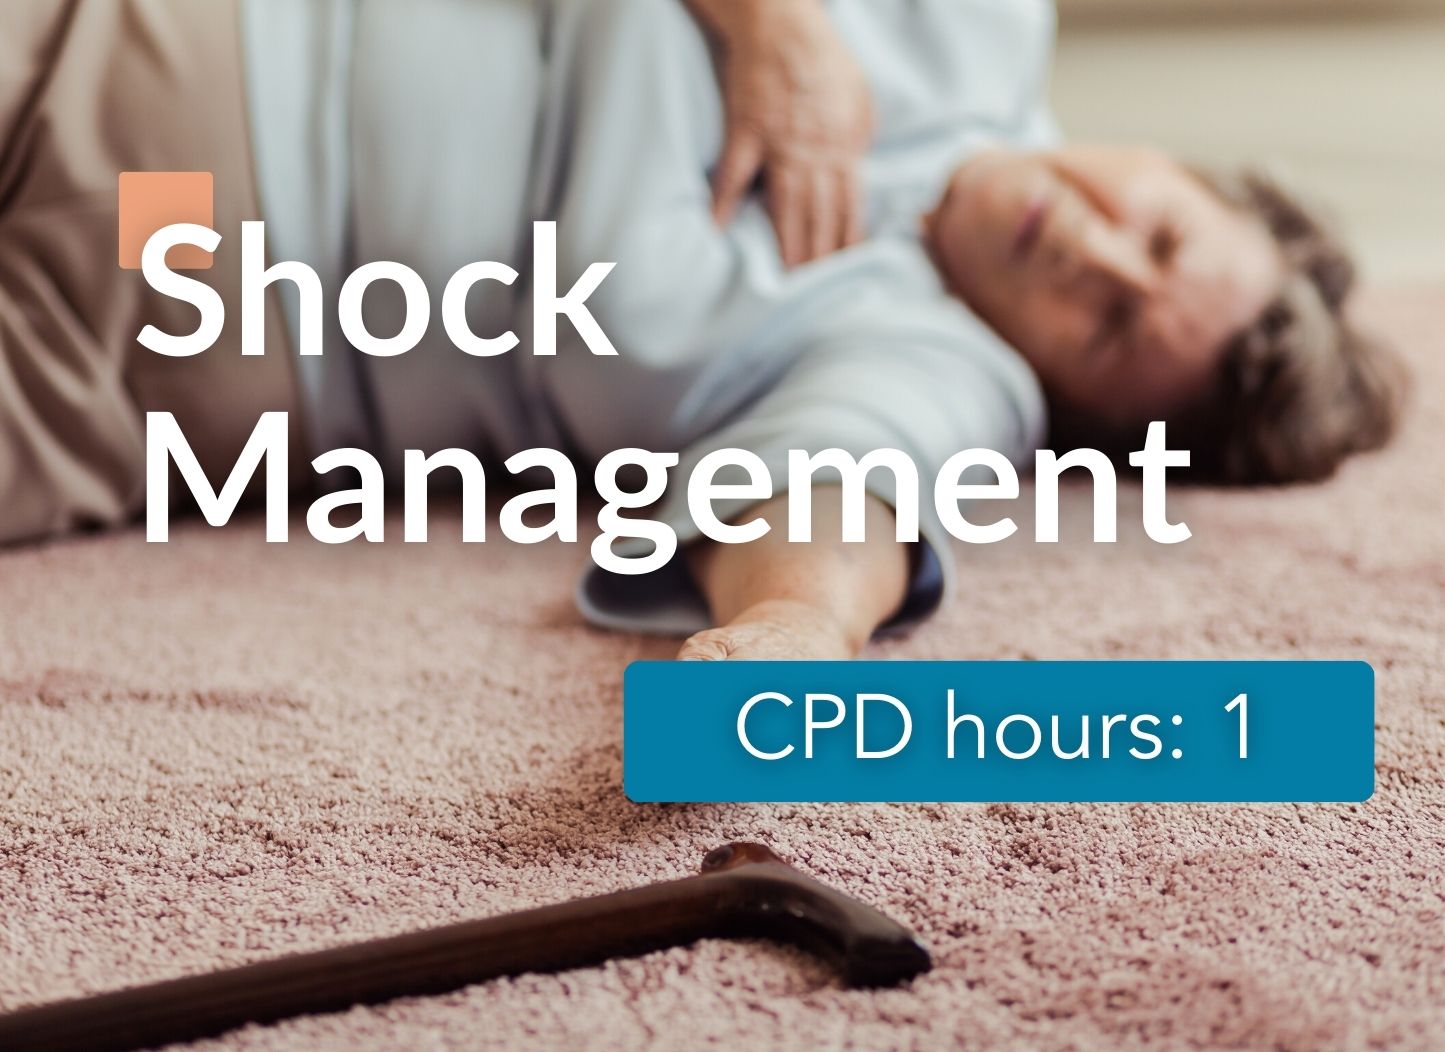 Shock: aetiology, presentation, diagnosis and management